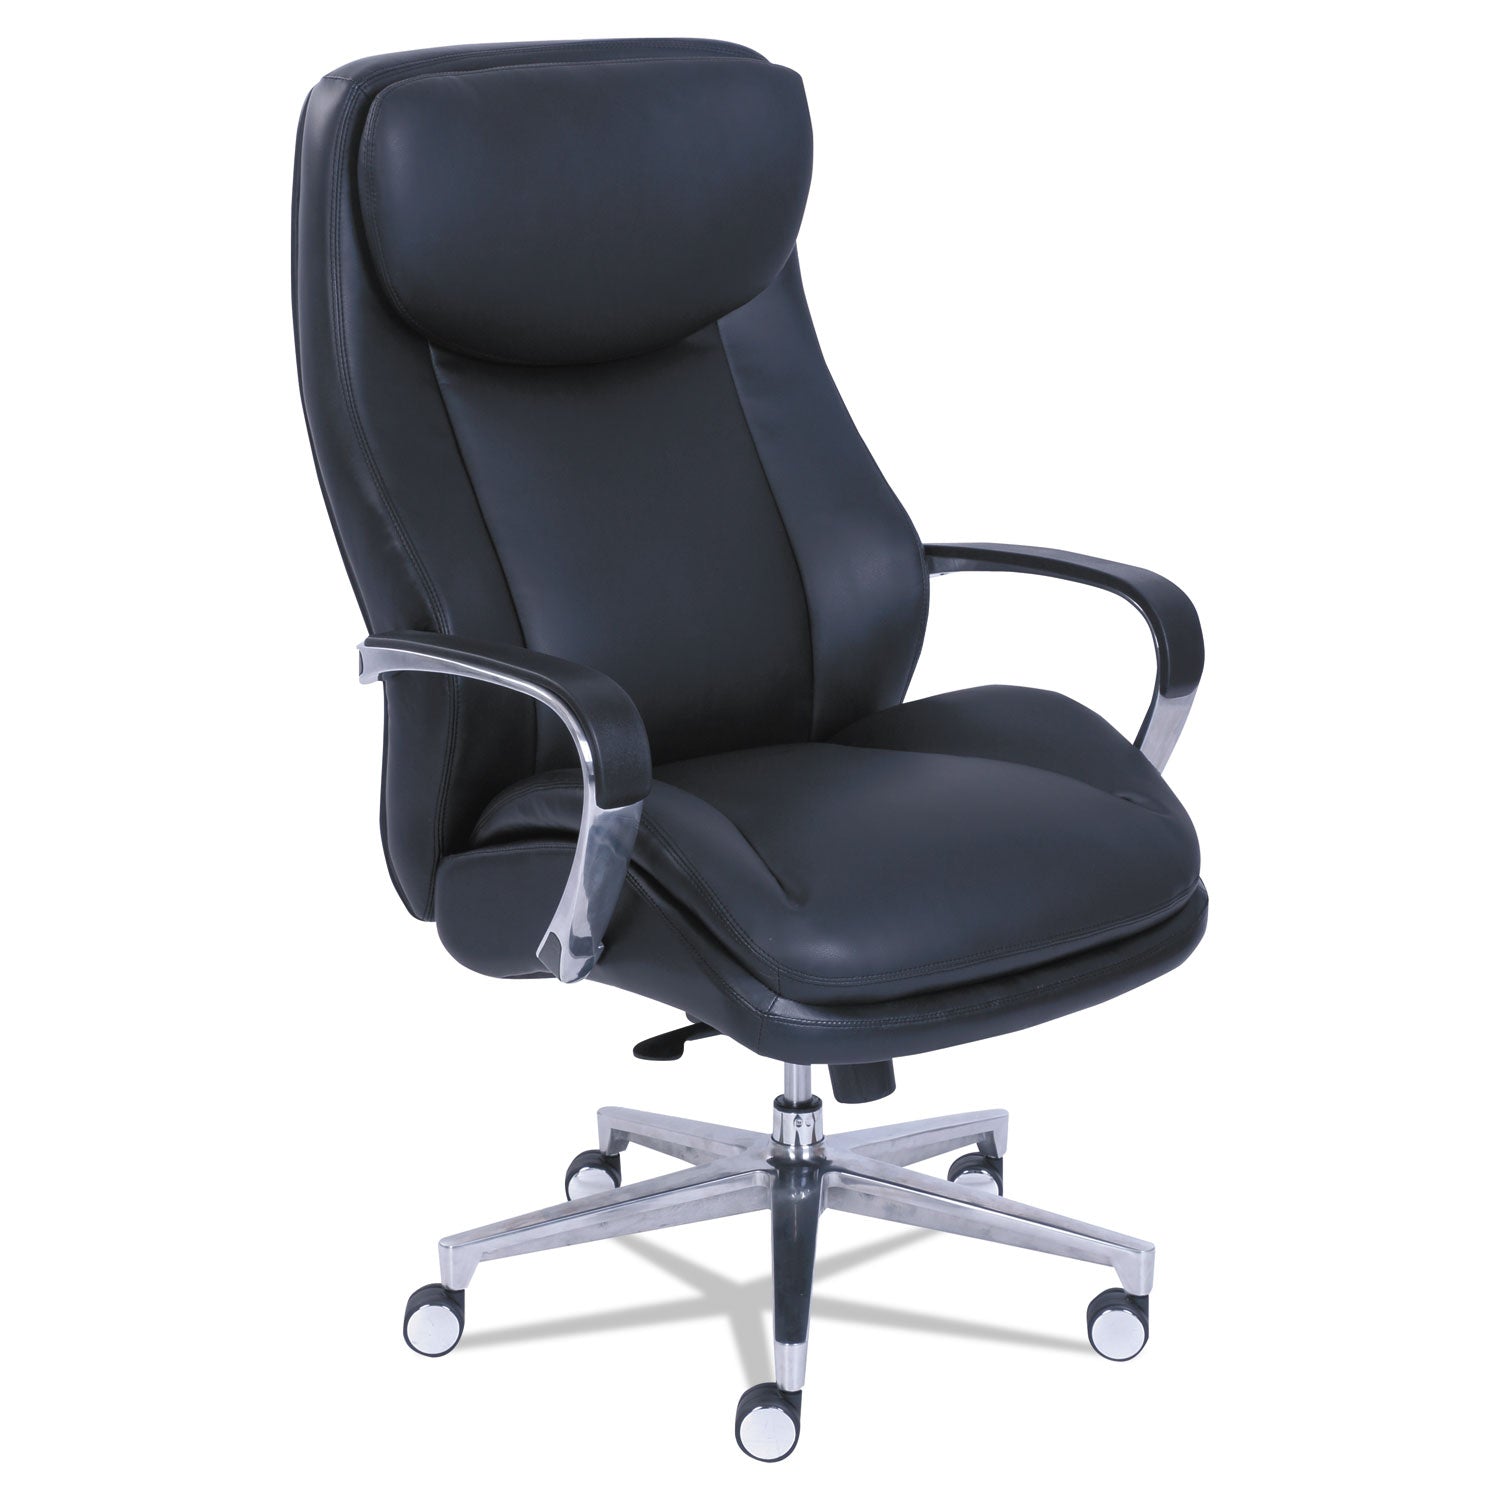 commercial-2000-big-tall-executive-chair-supports-up-to-400-lb-205-to-235-seat-height-black-seat-back-silver-base_lzb48968 - 1